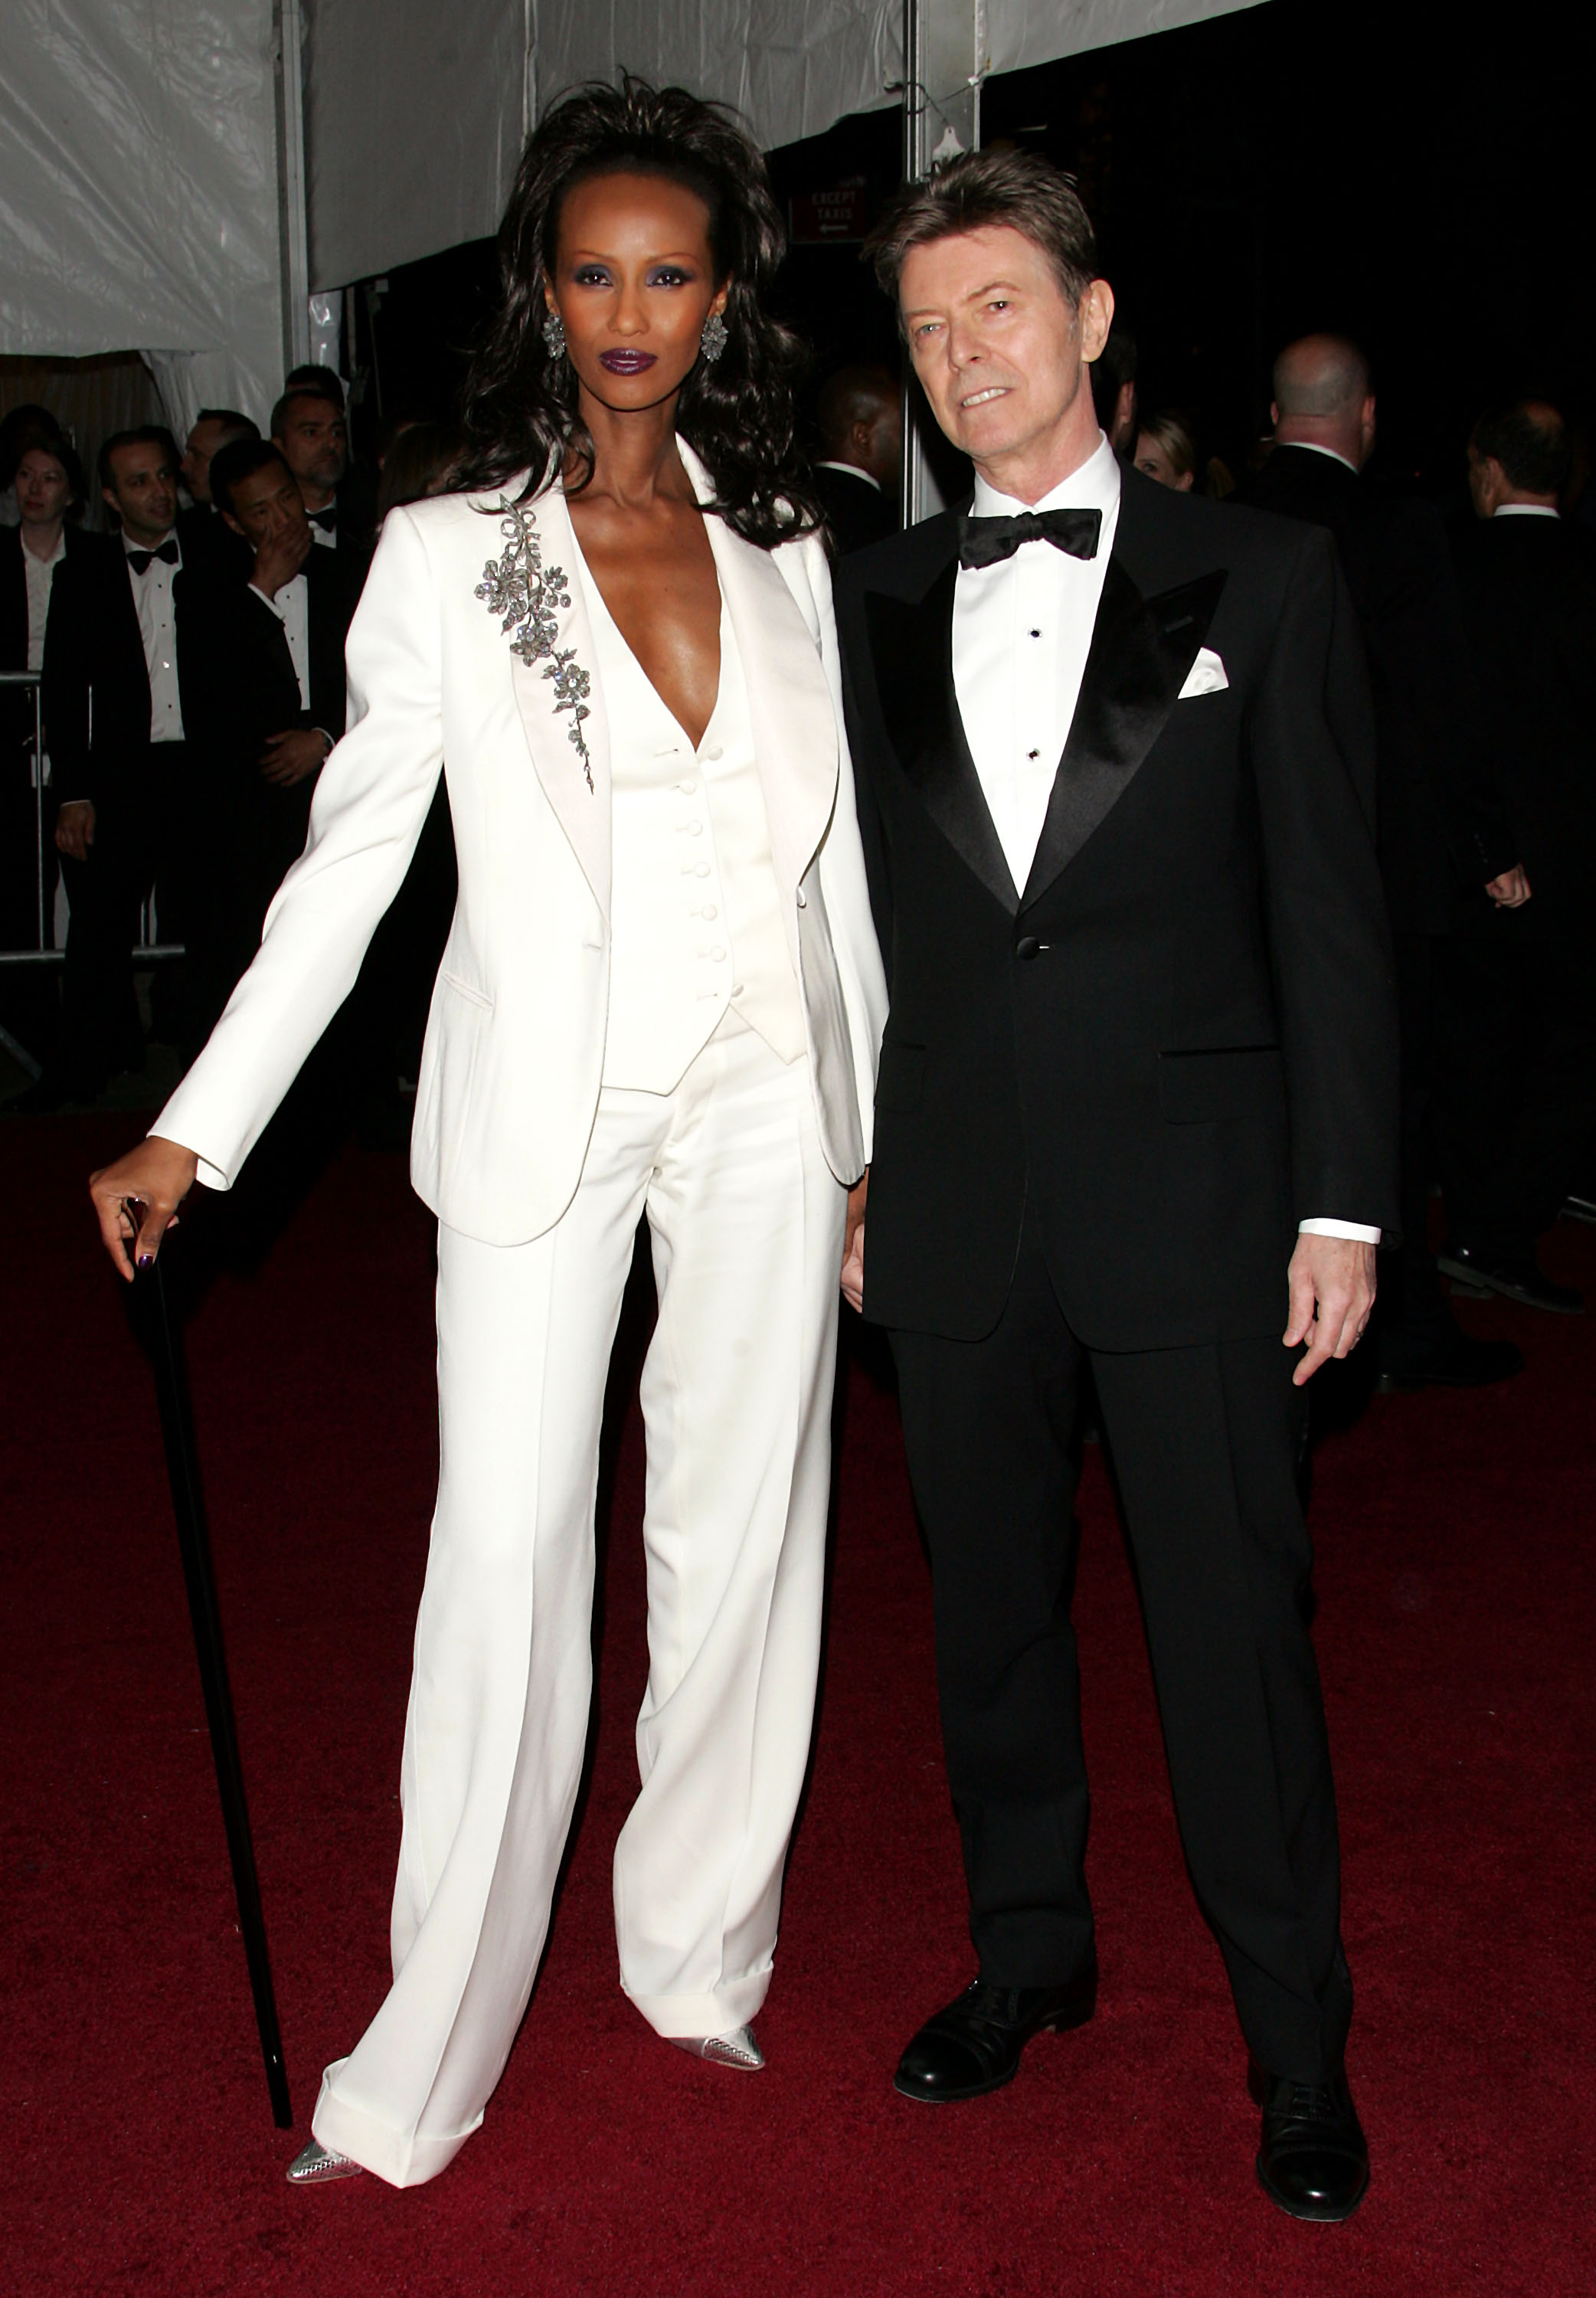 Iman with David Bowie at the Met Gala 2007